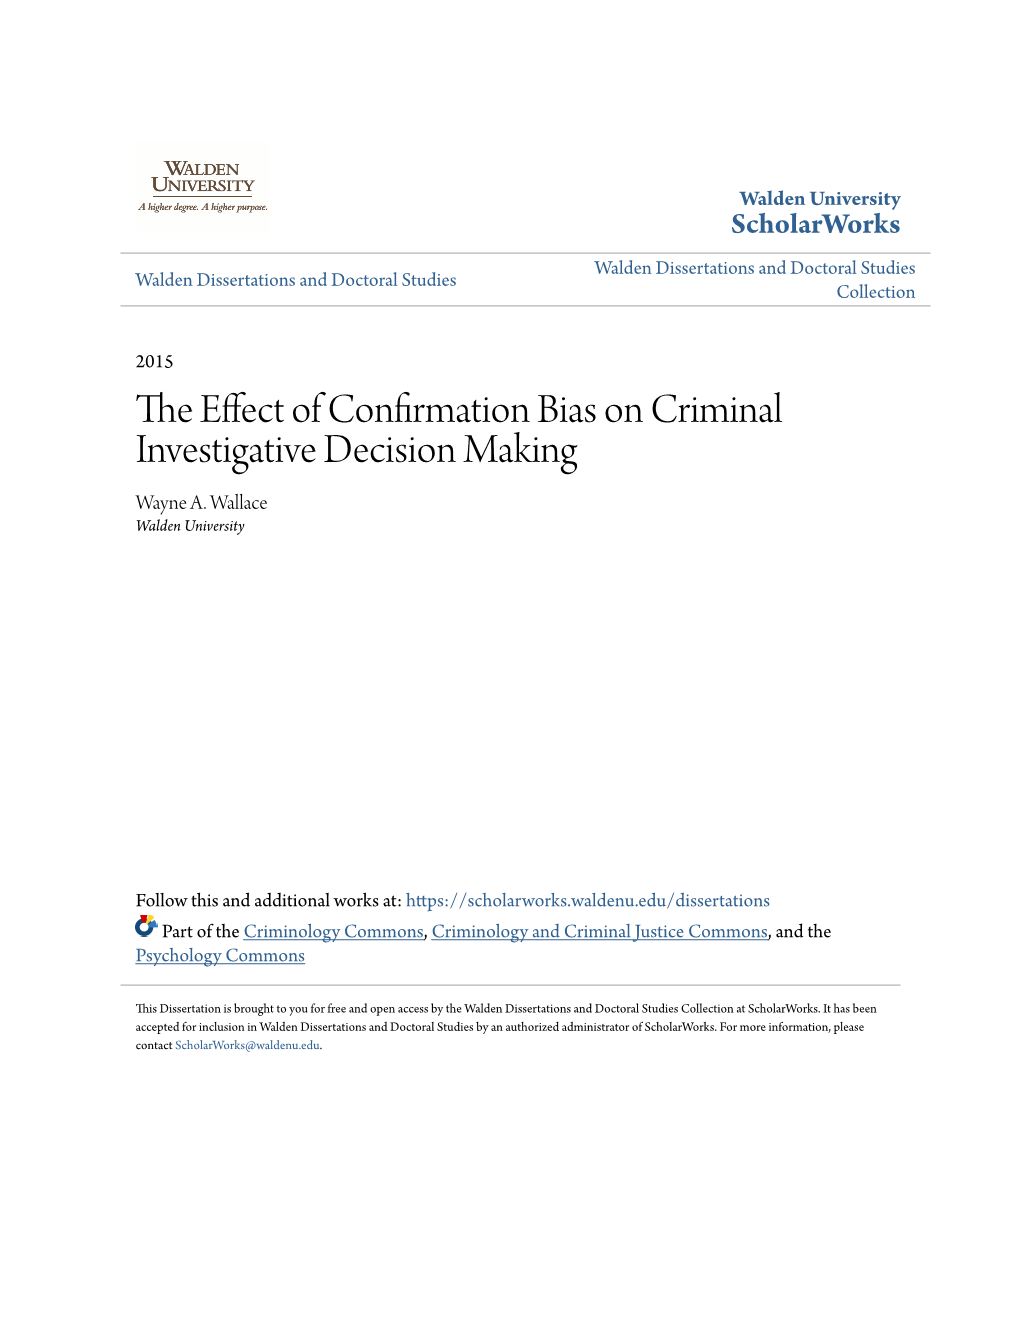 The Effect of Confirmation Bias on Criminal Investigative Decision Making